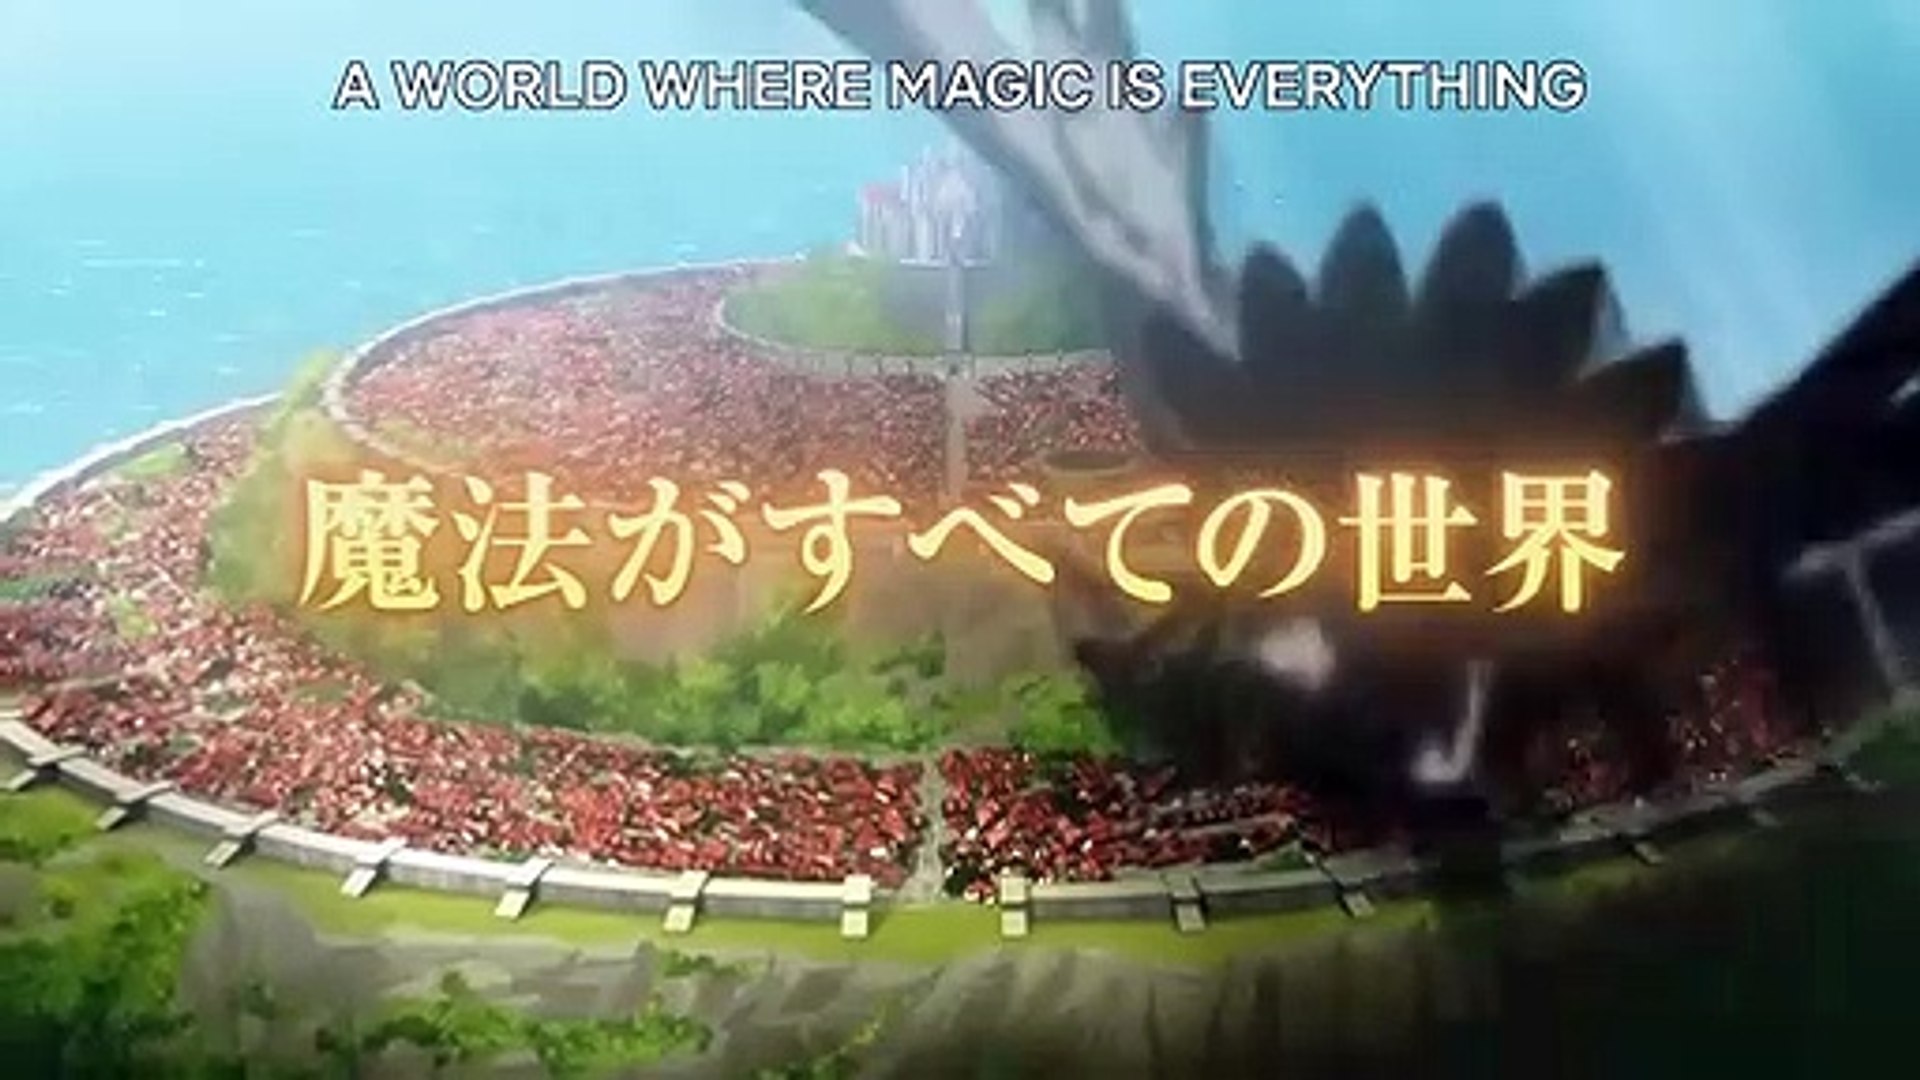 Black Clover: Sword of the Wizard King, Official Trailer